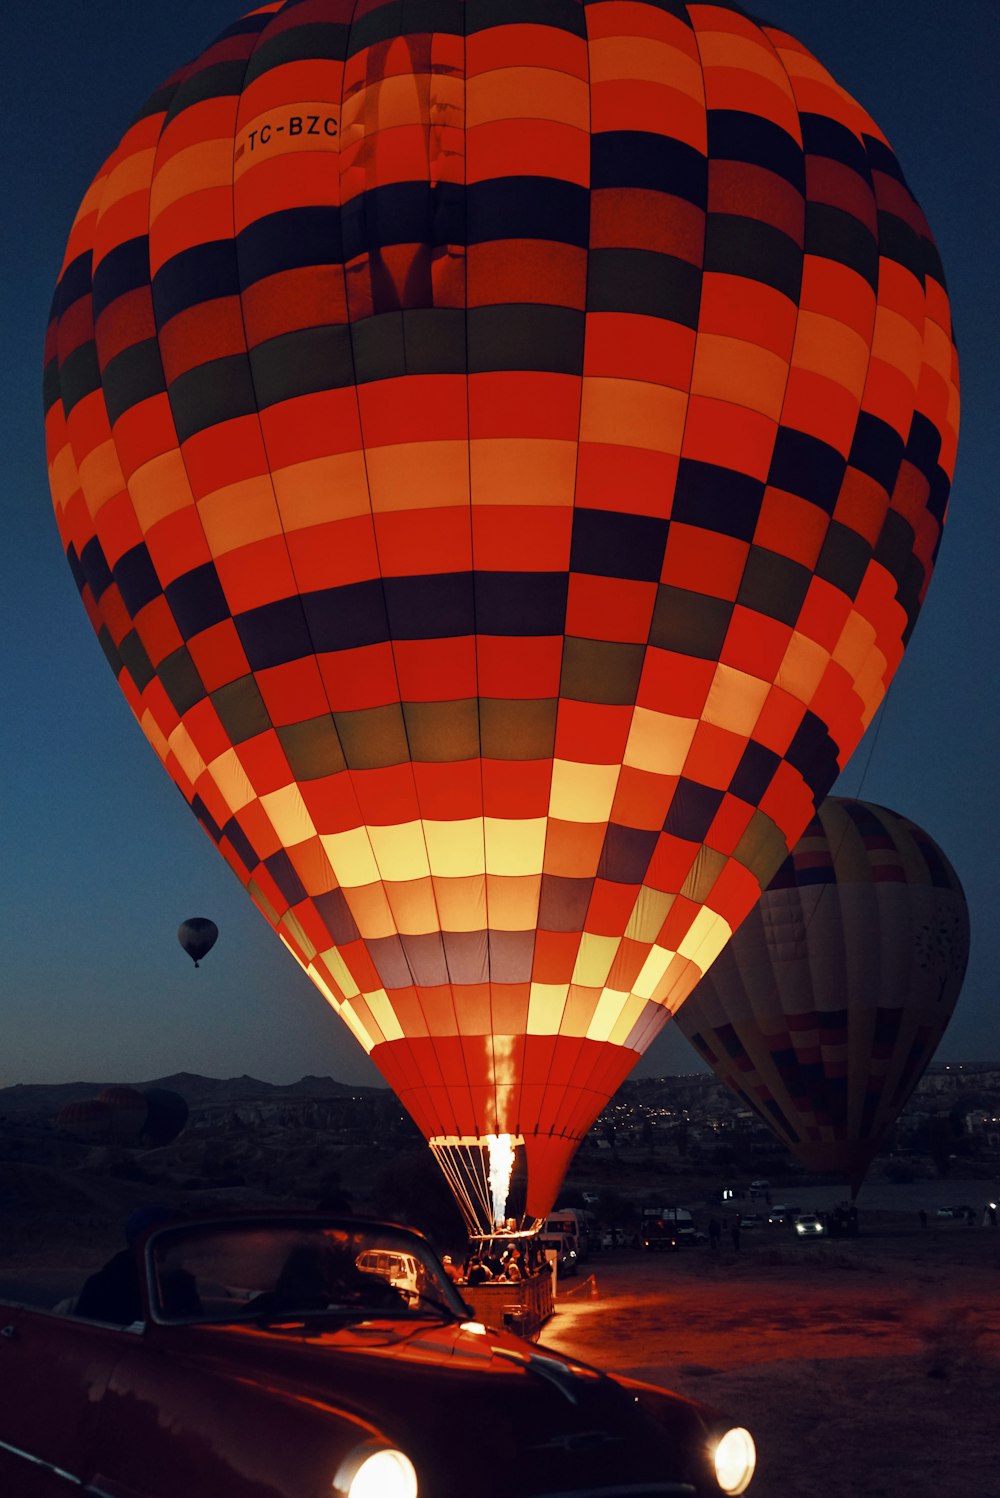 a hot air balloon with a car in the foreground